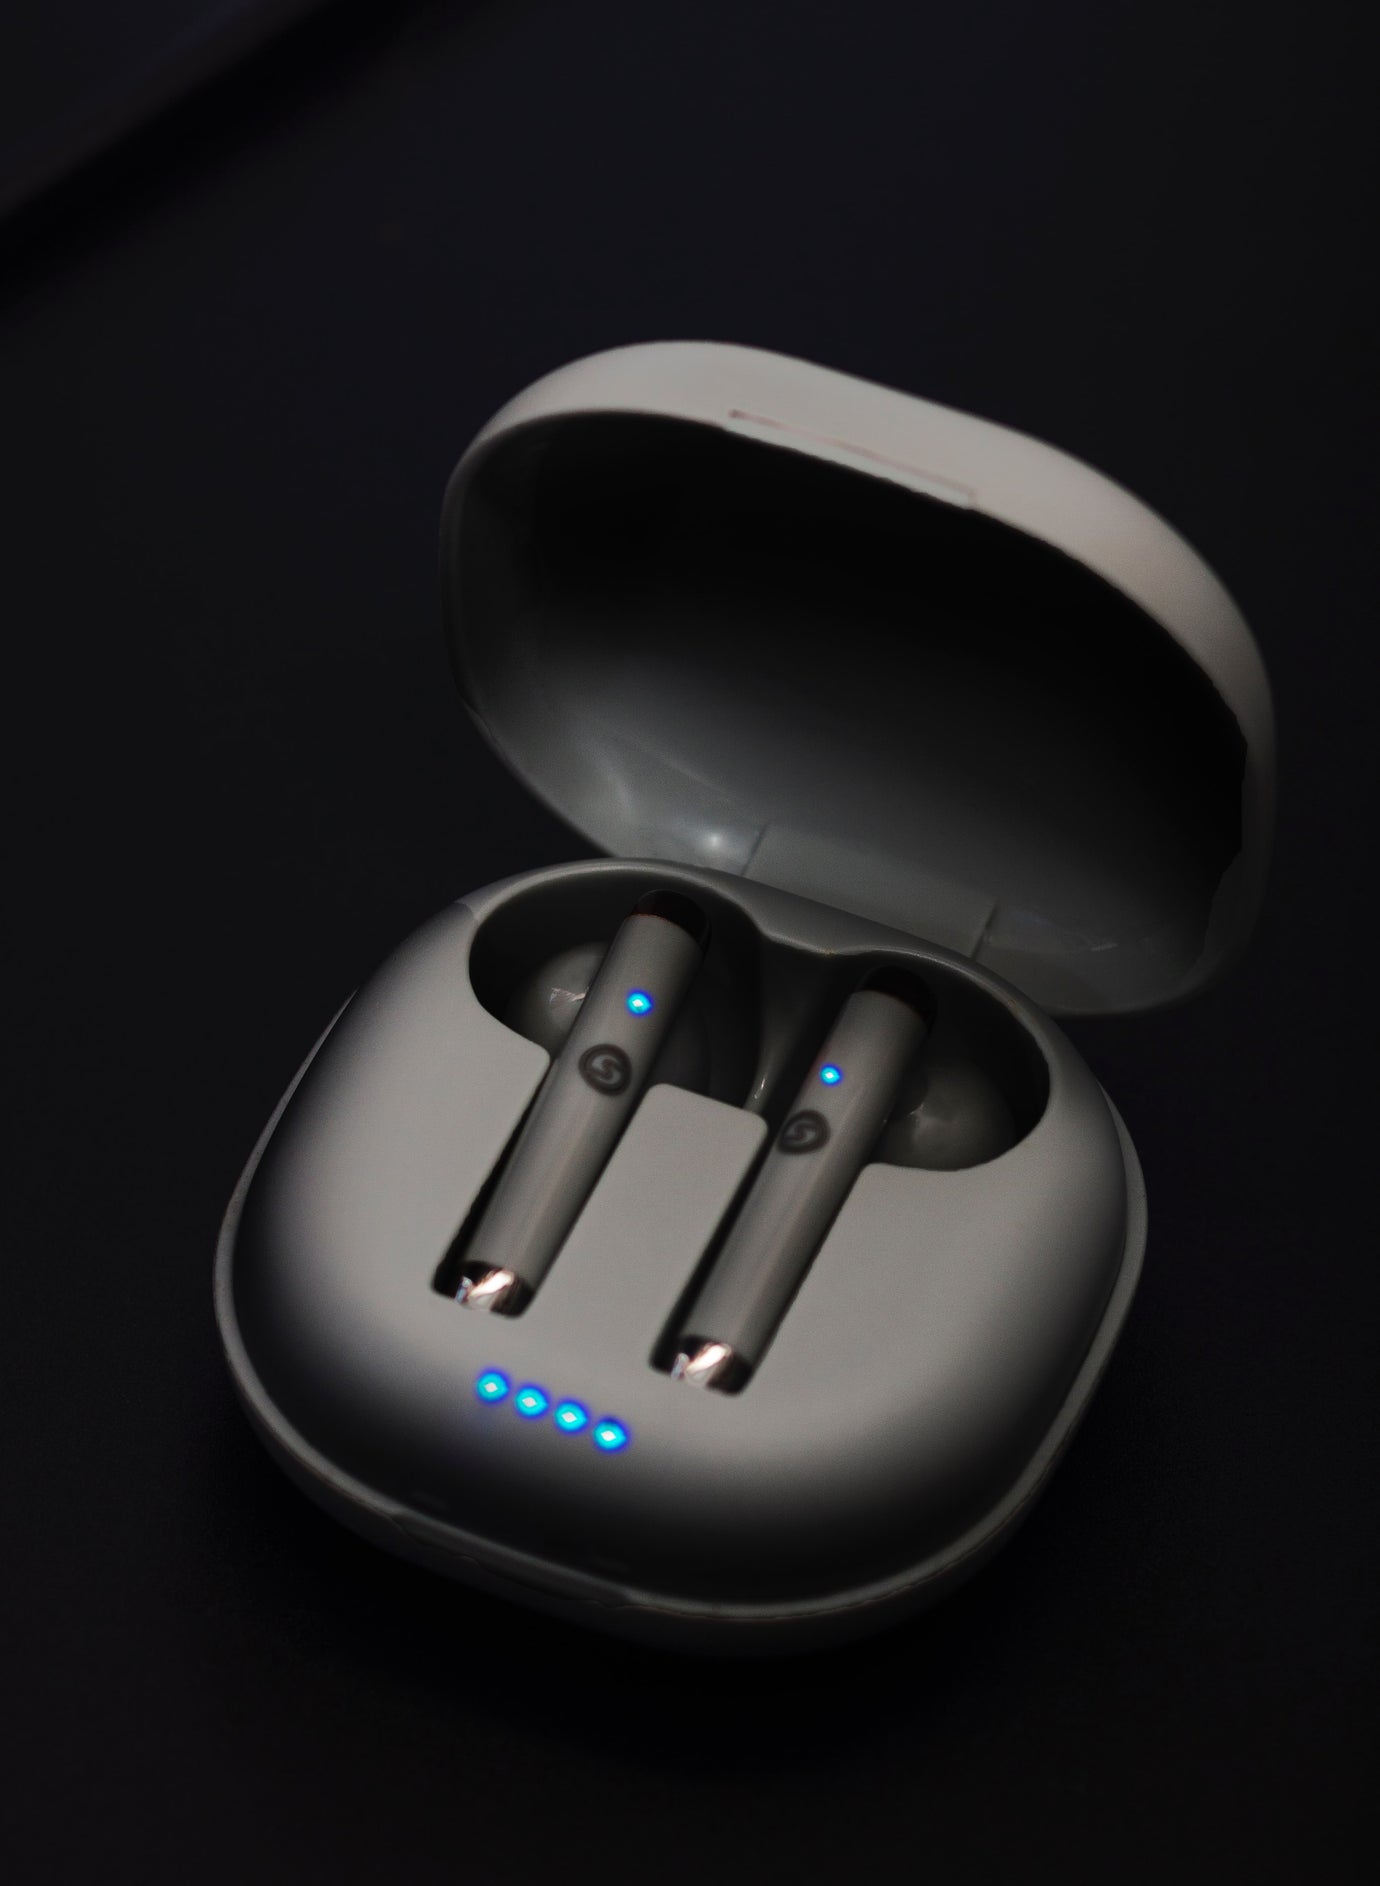 Black earbuds in an open case with blue lights